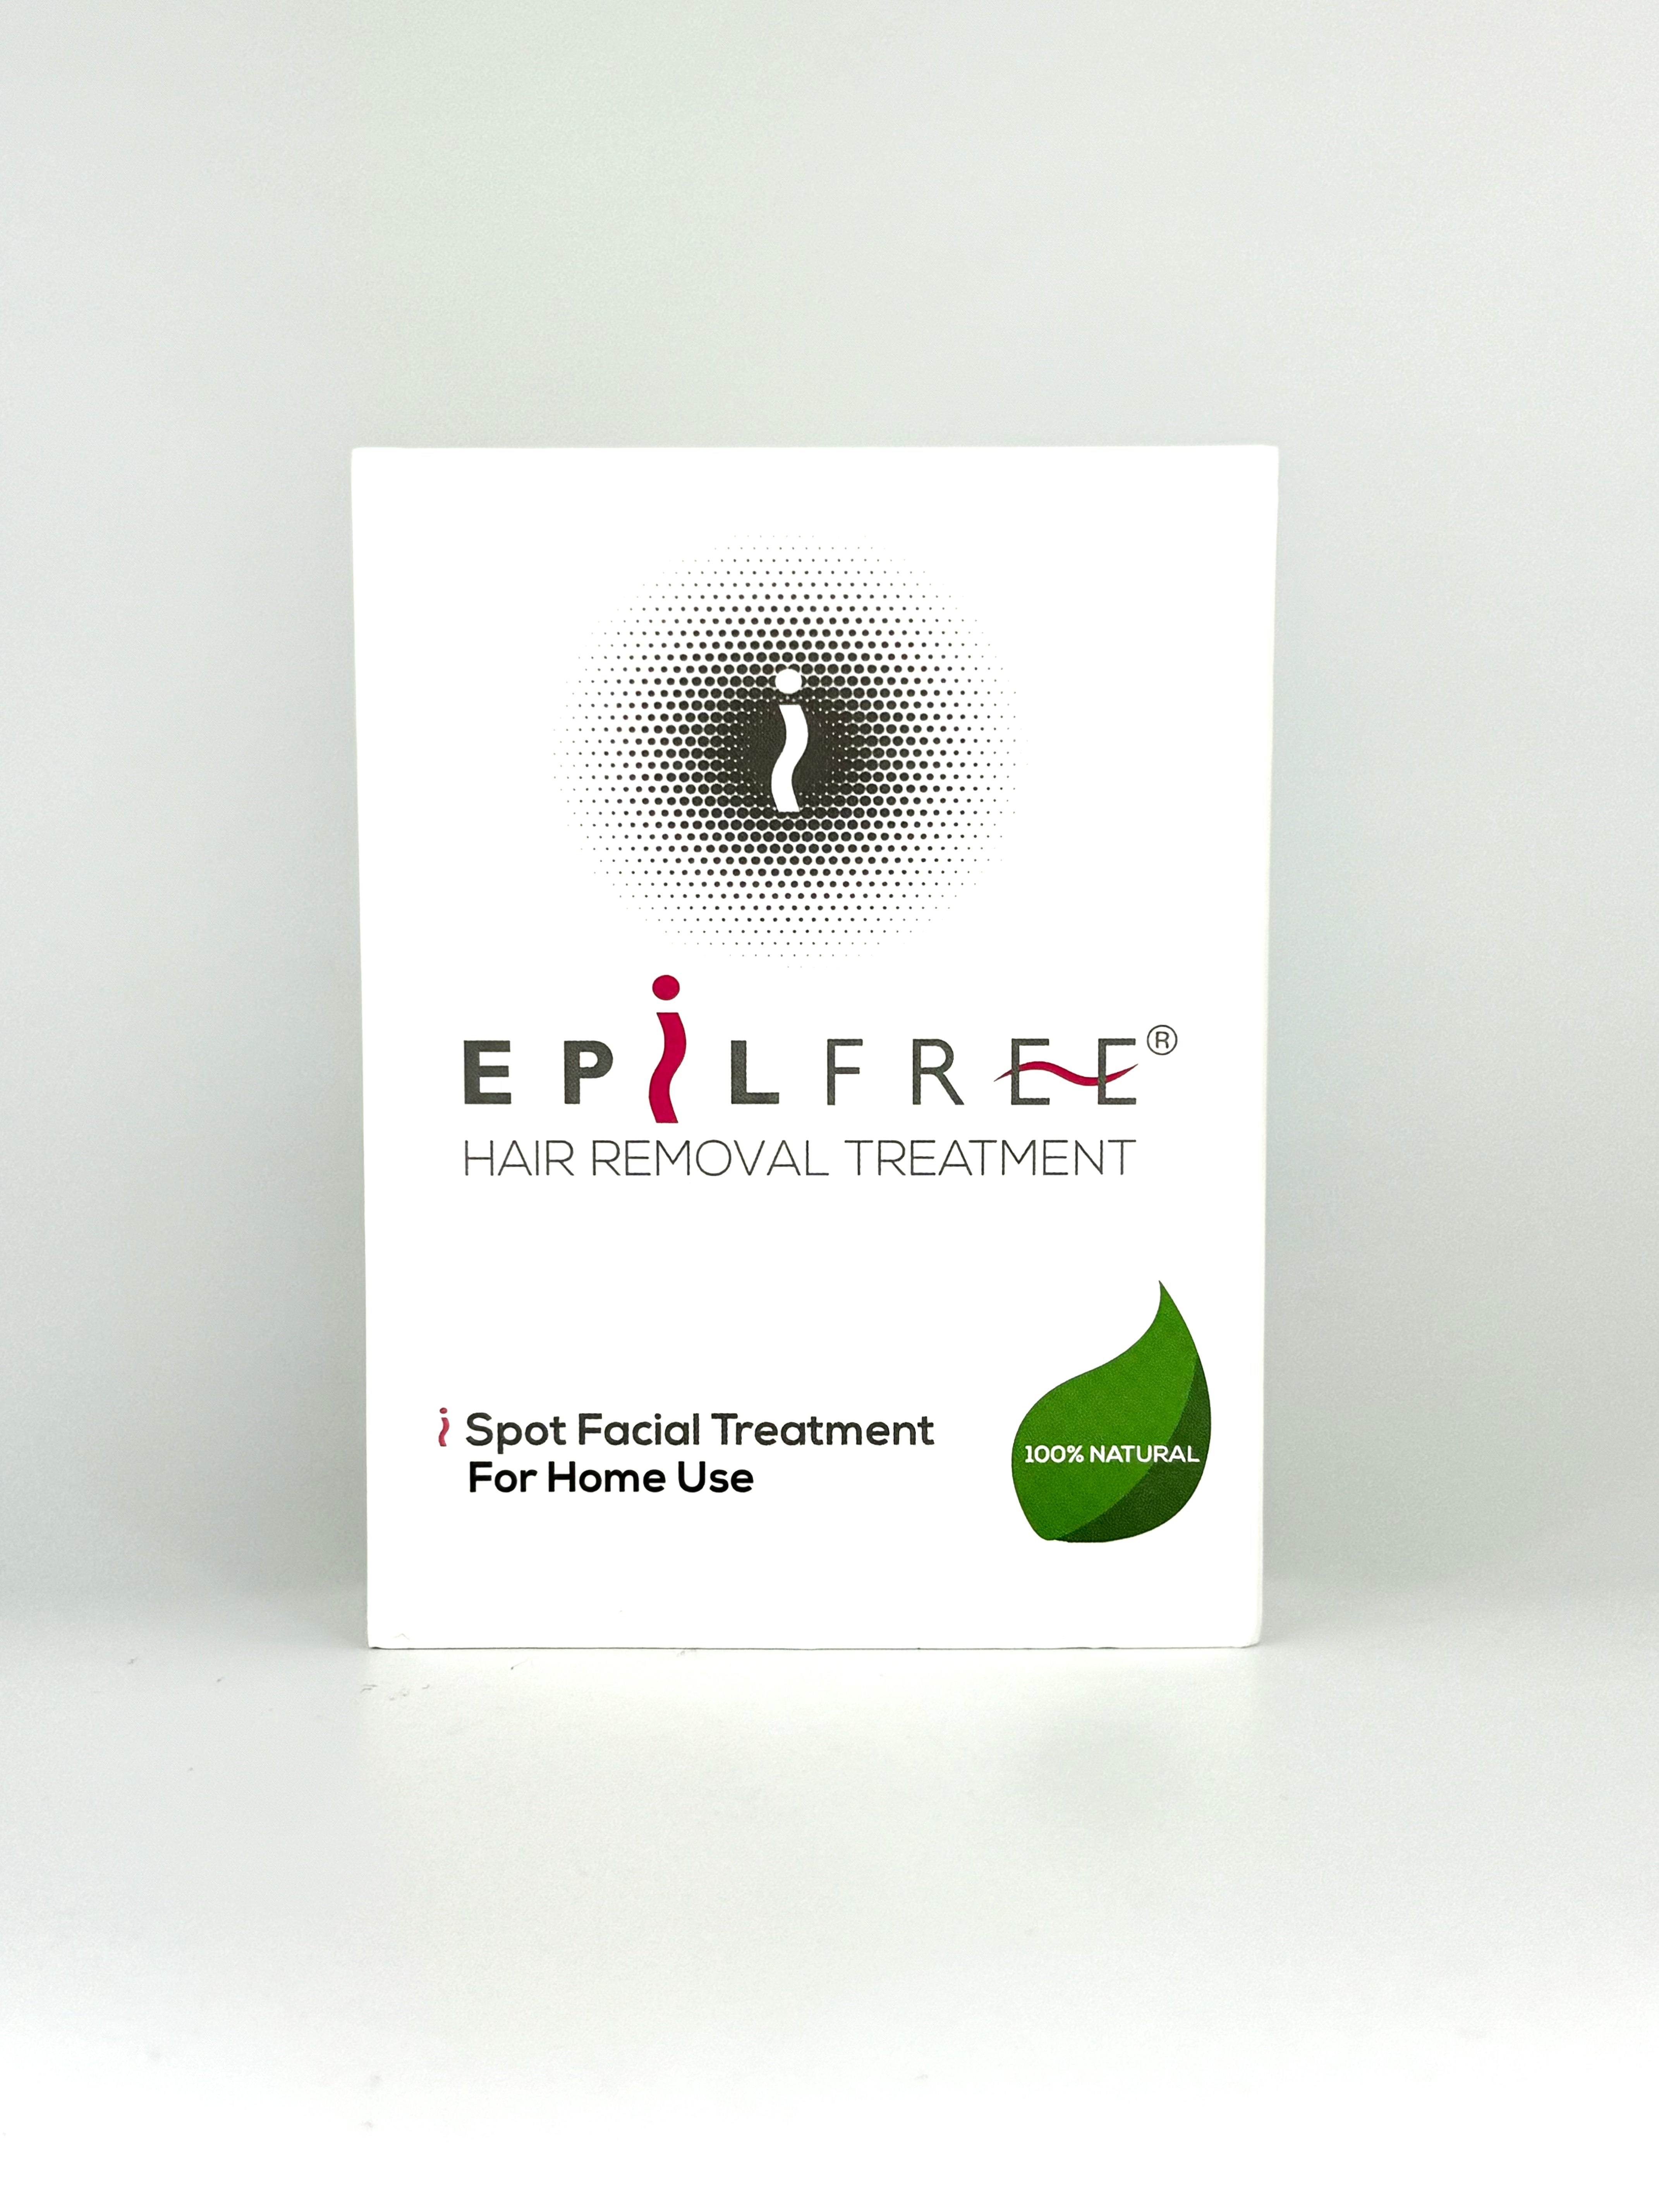 Epilfree Home Hair Removal Treatment